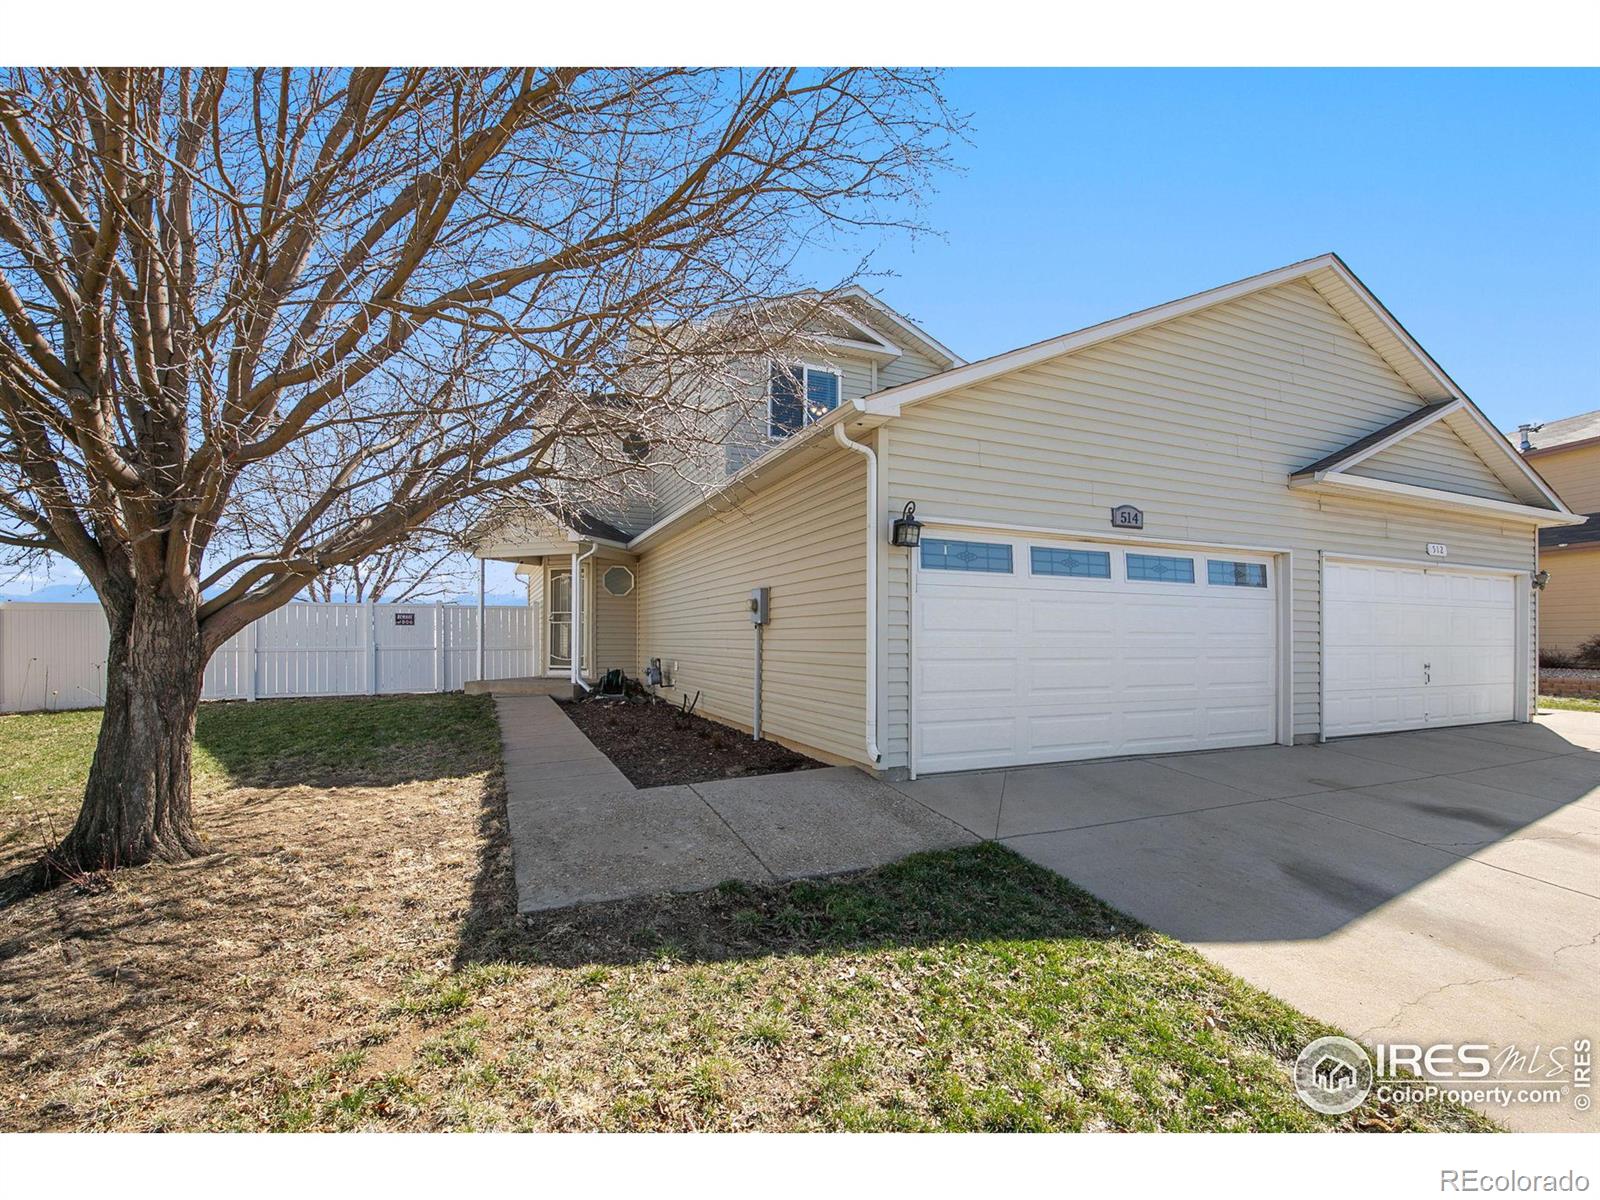 514 N 28th Ave Ct, greeley MLS: 4567891005379 Beds: 3 Baths: 2 Price: $345,000